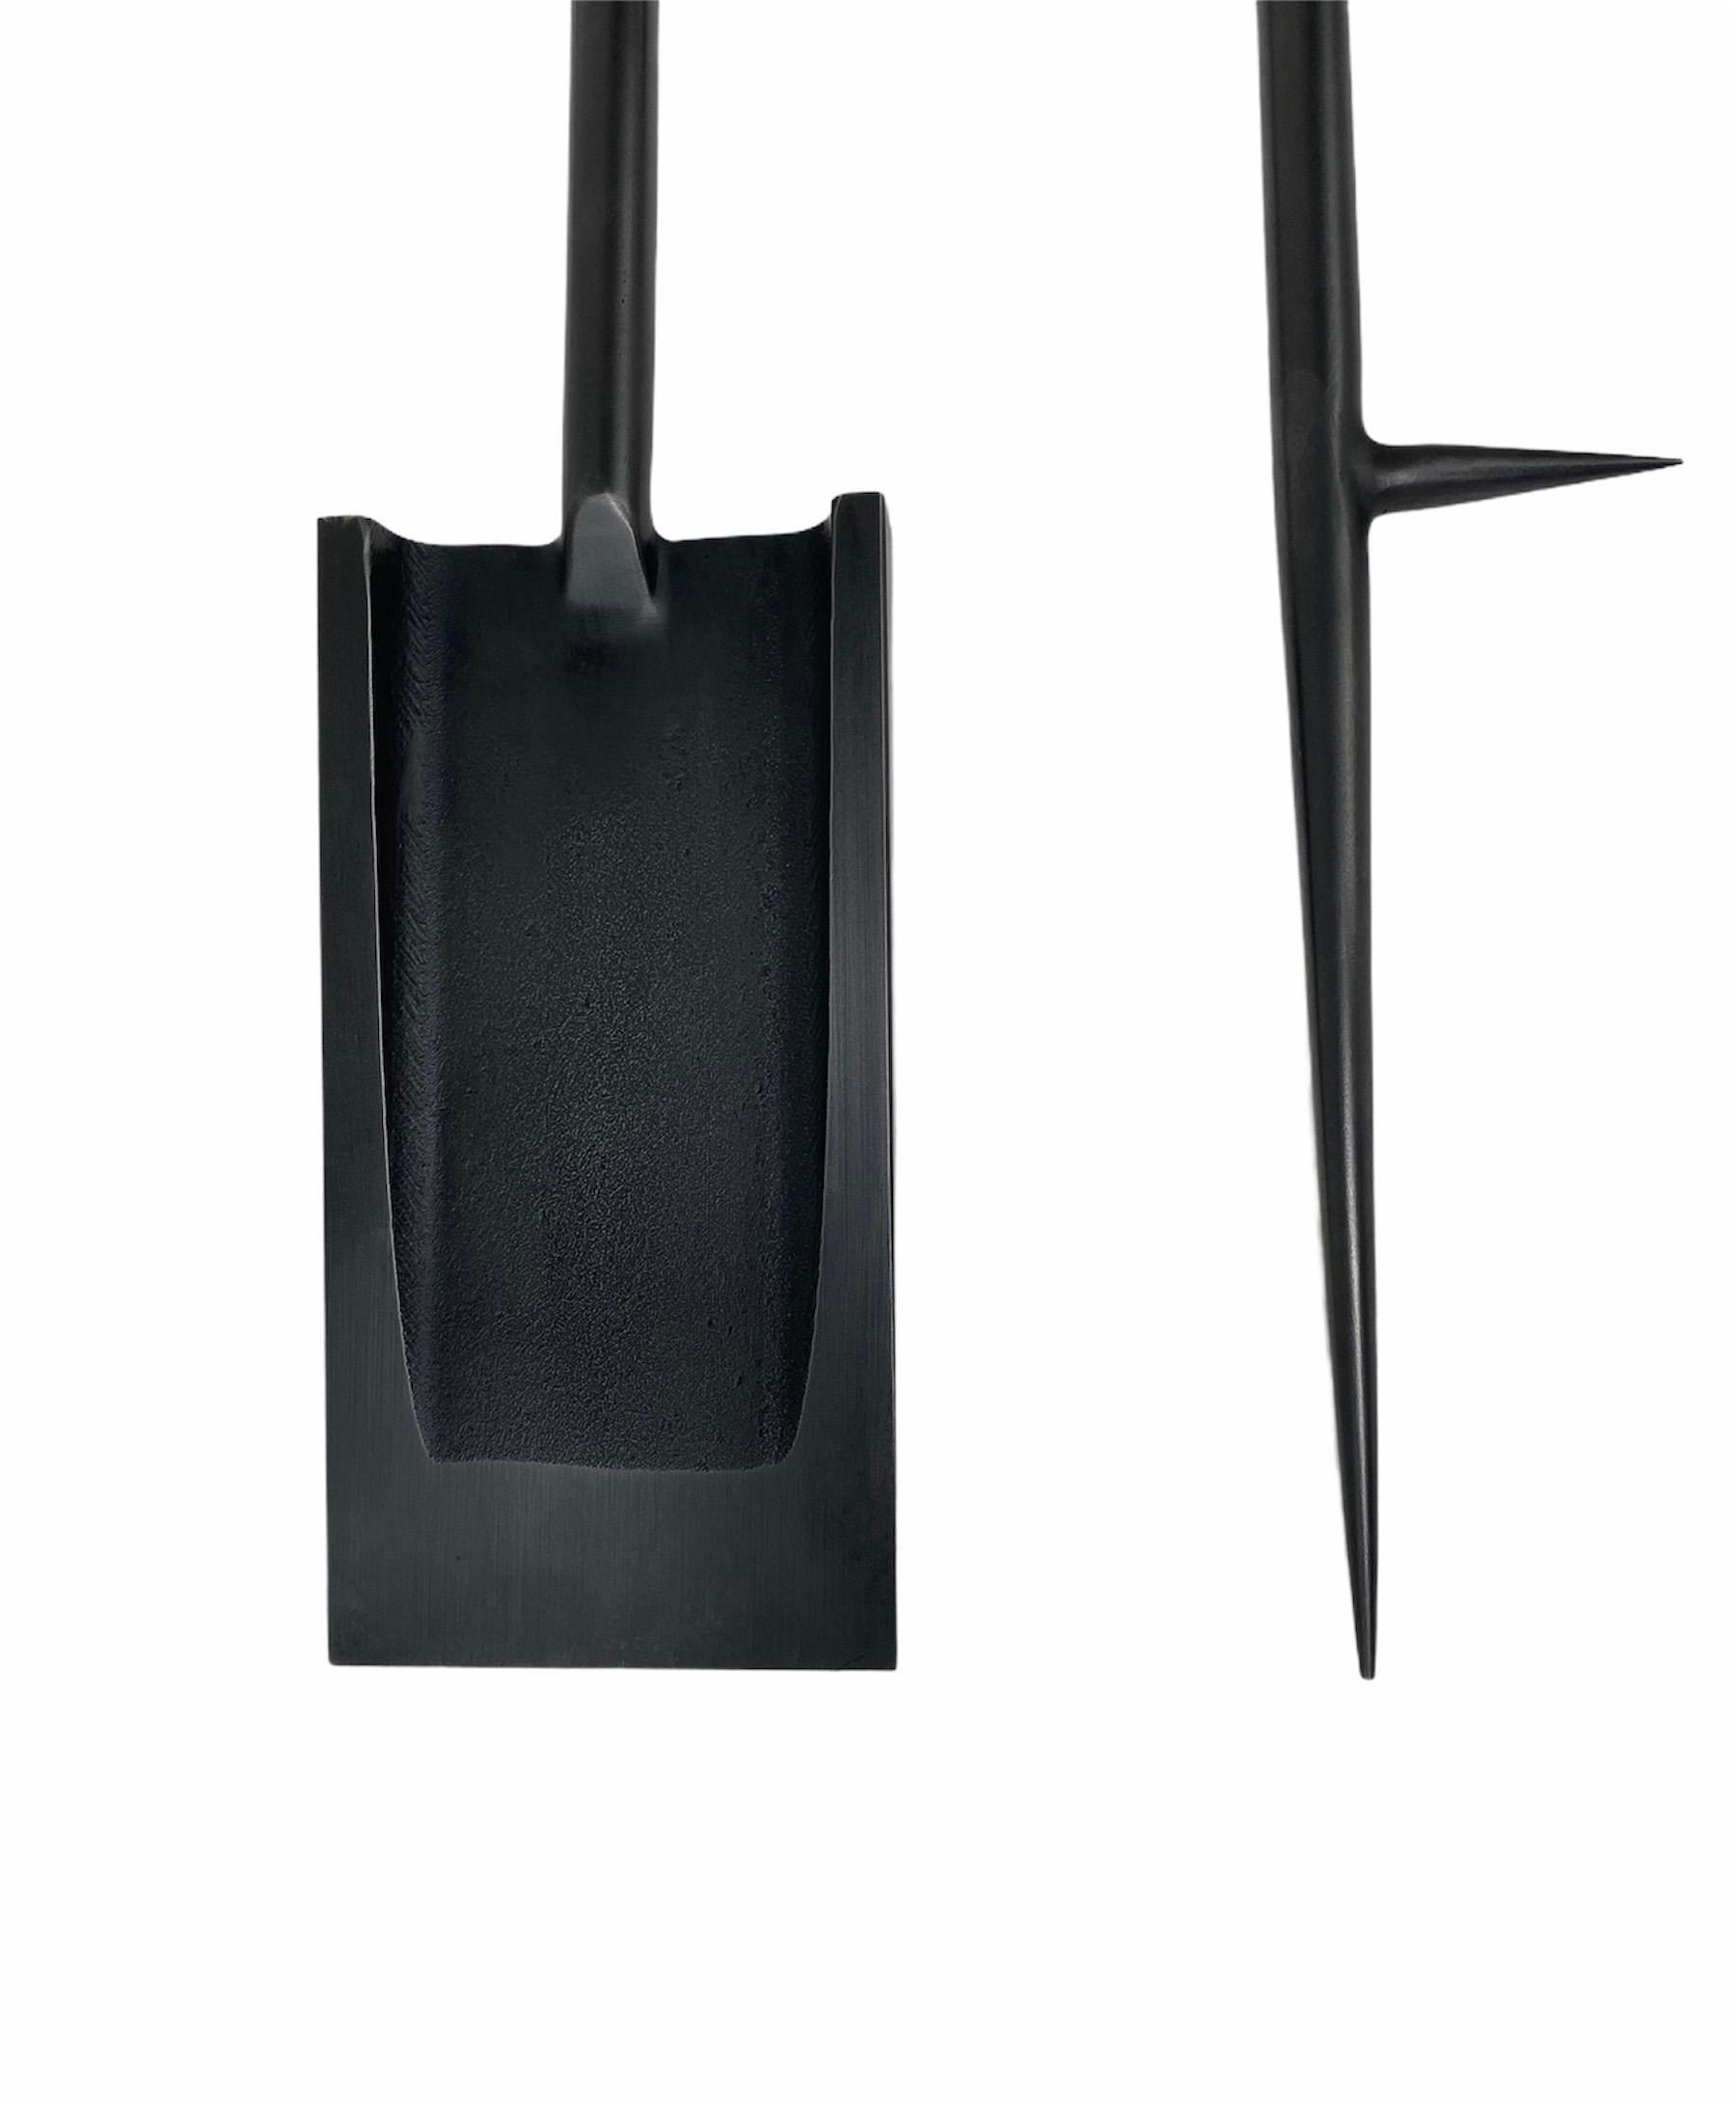 North American Handmade Modern Blackened Steel Fireplace Tool Set with Shovel and Poker For Sale